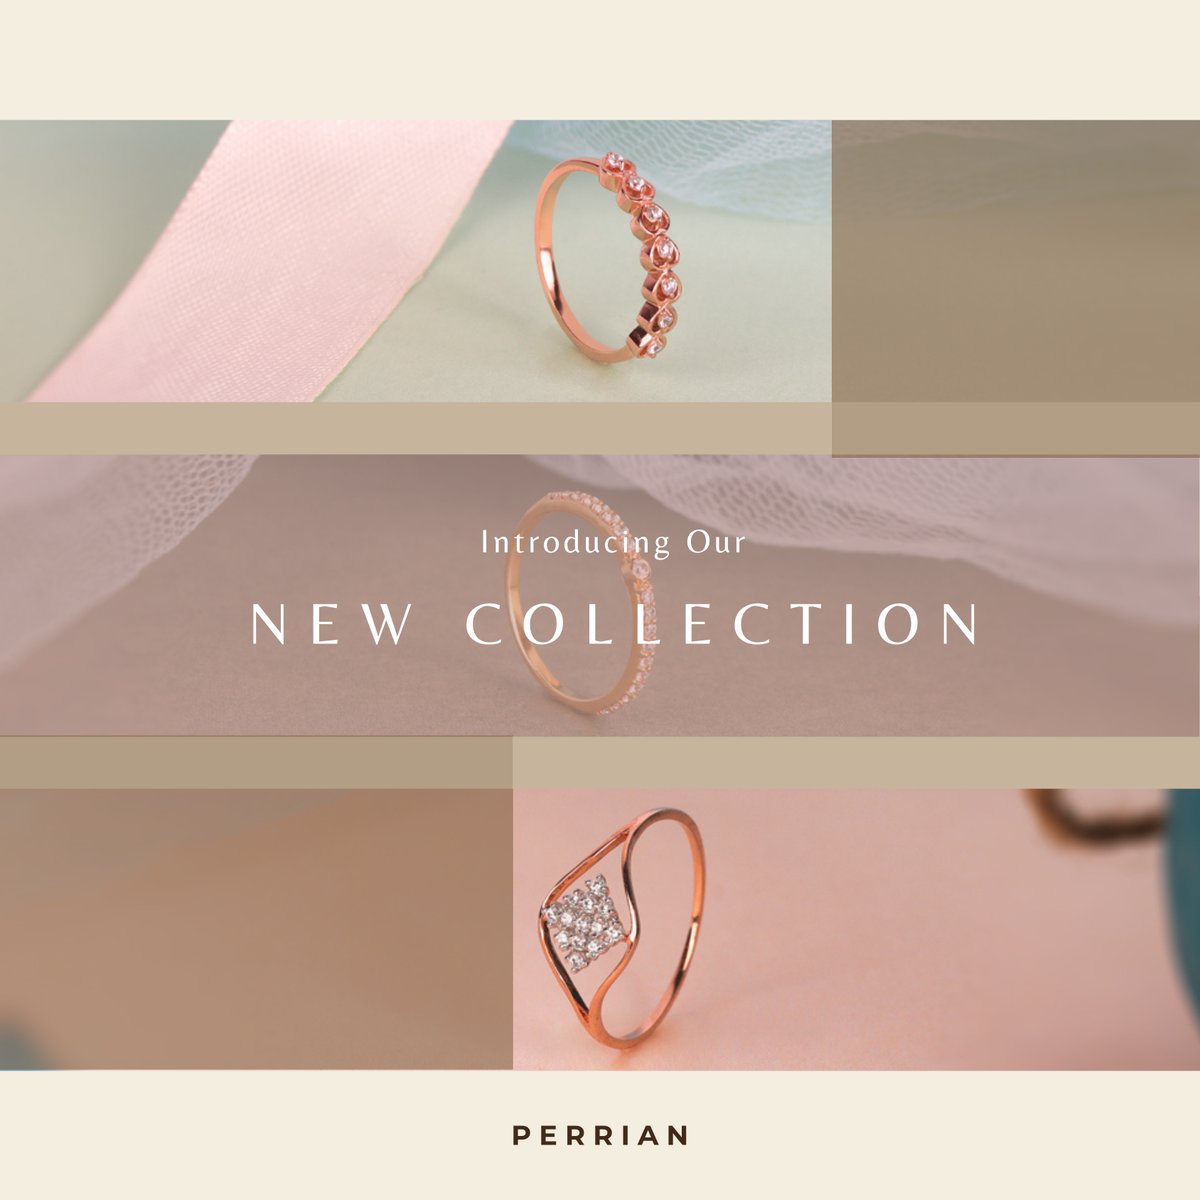 Bold, dainty, minimalist or glam - we've got a new ring vibe for everyone. Level up your finger candy game. 💍perrian.com/jewellery/rings
#promisering #perrian #weddingband